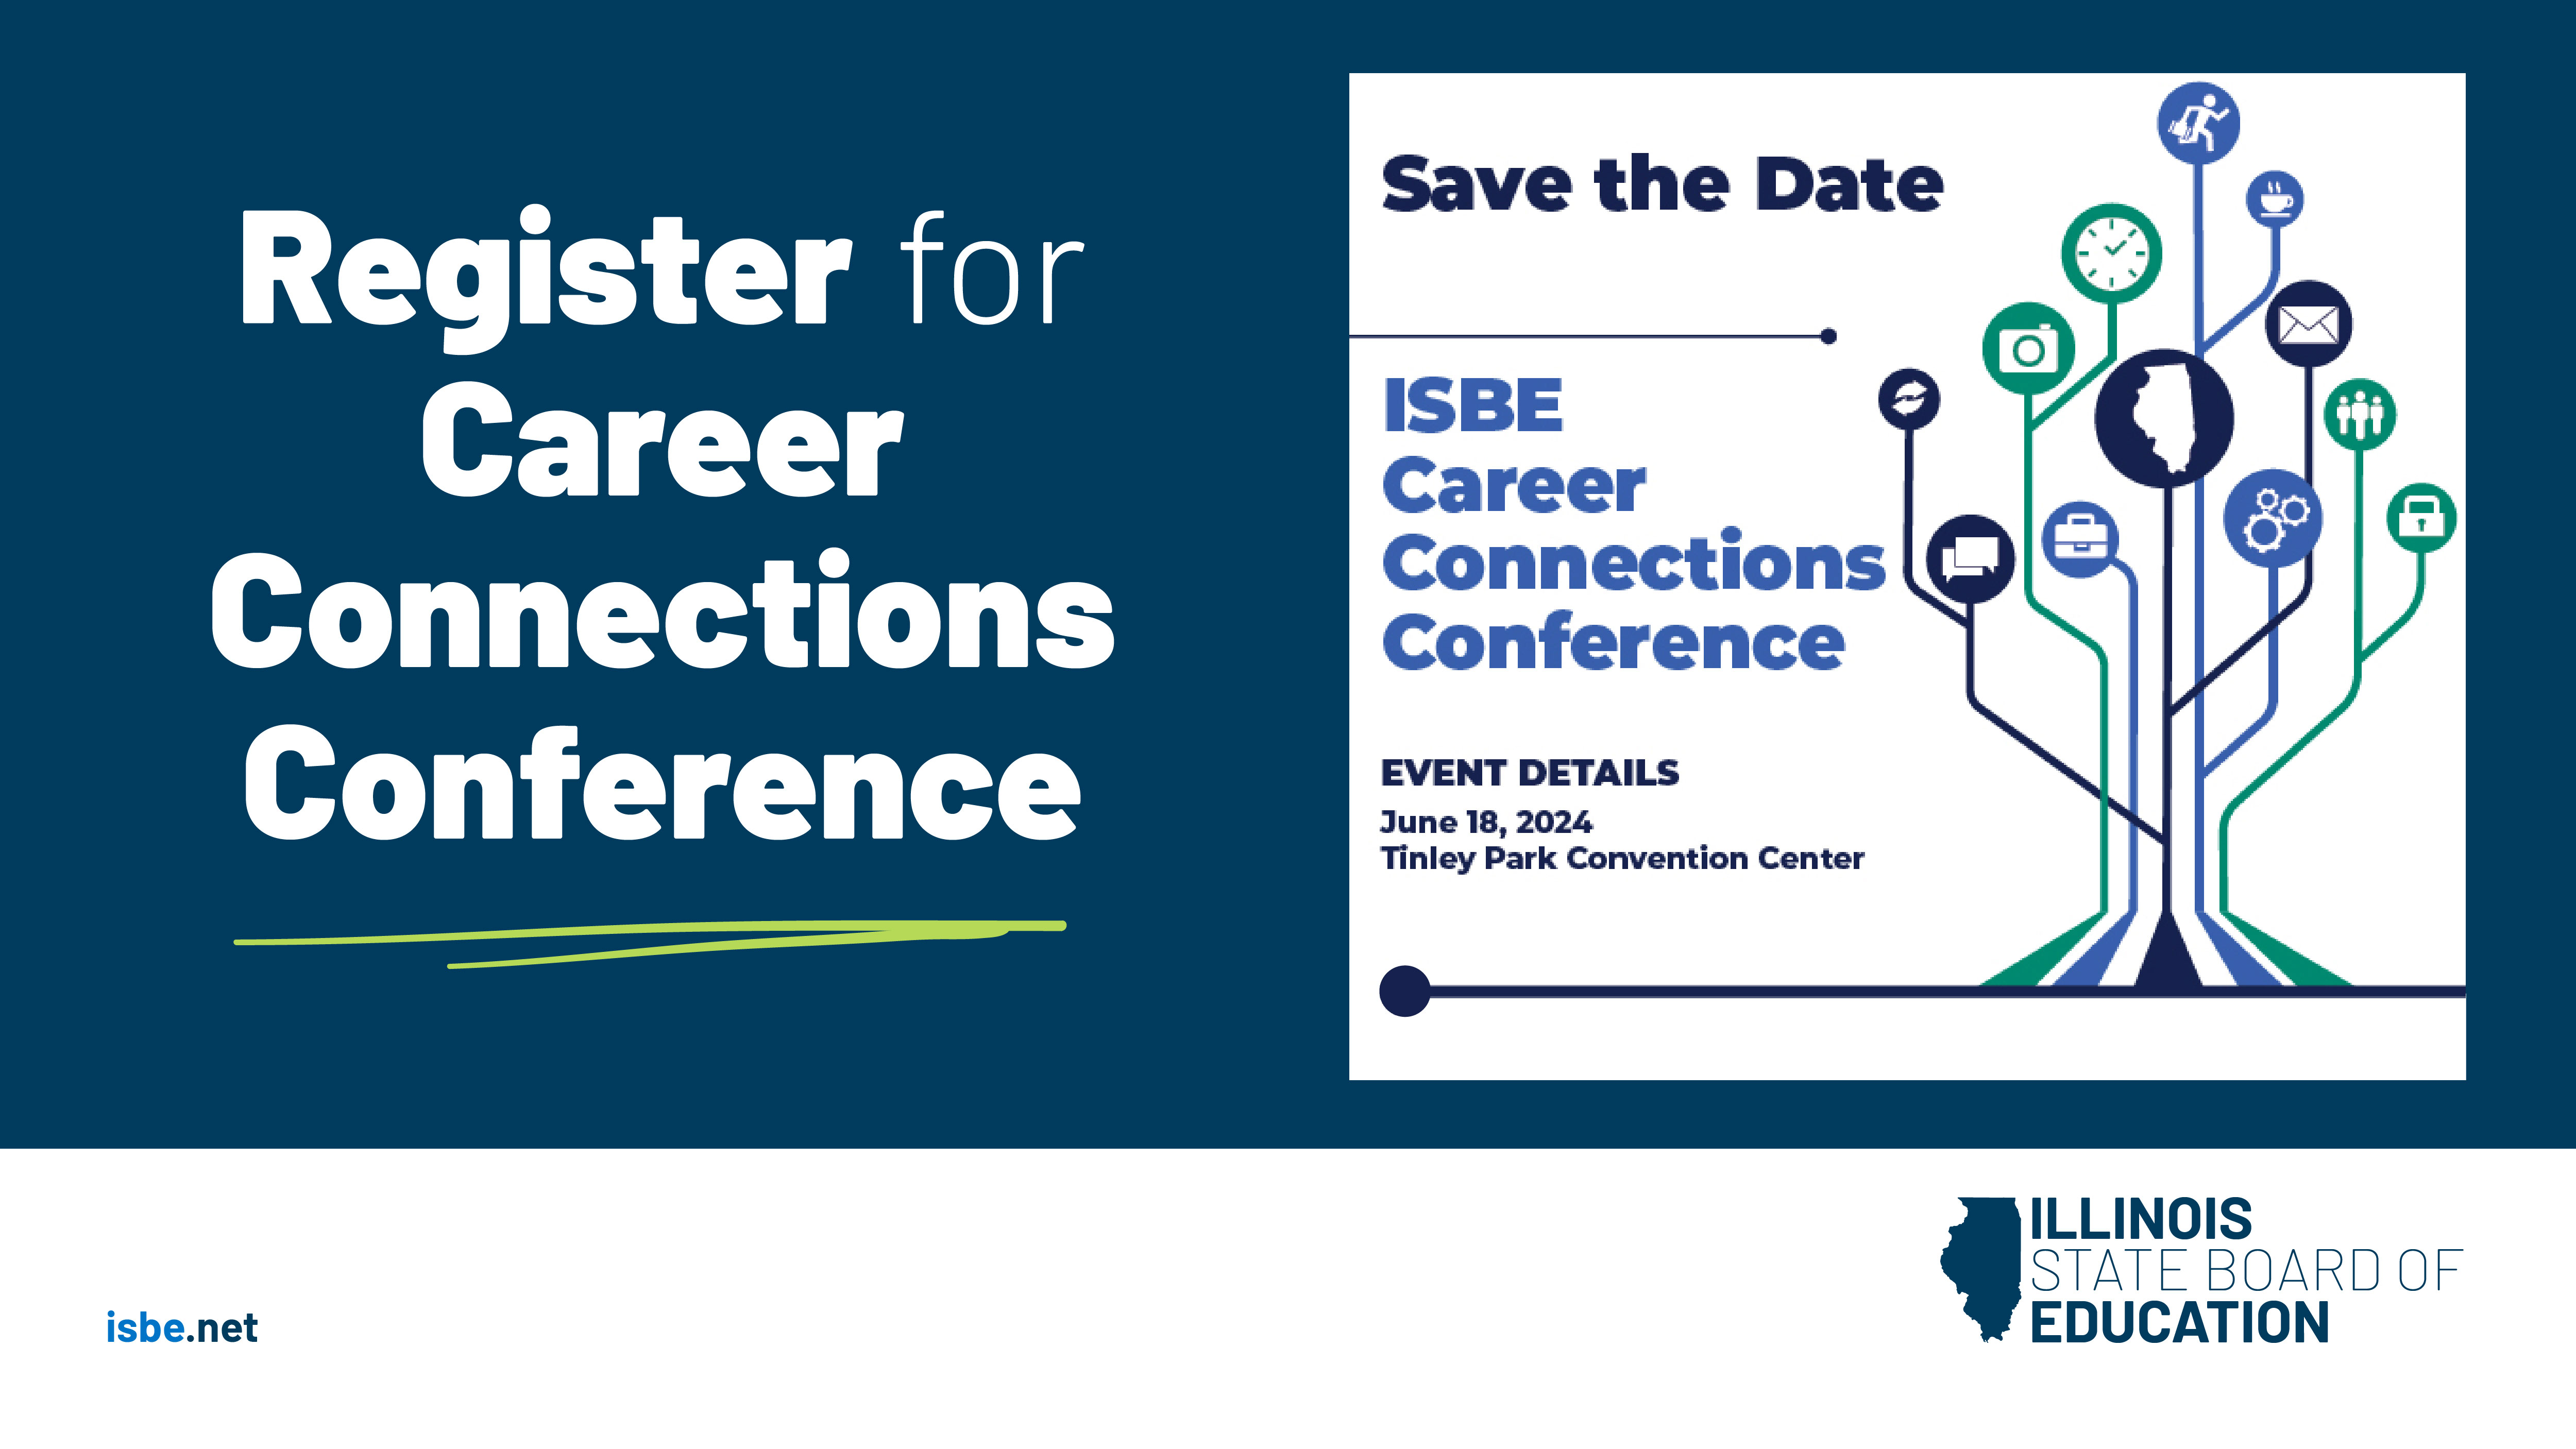 Save the Date and register for Career Connections Conference on June 18 at Tinley Park Convention Center. Image of Save the Date graphic.